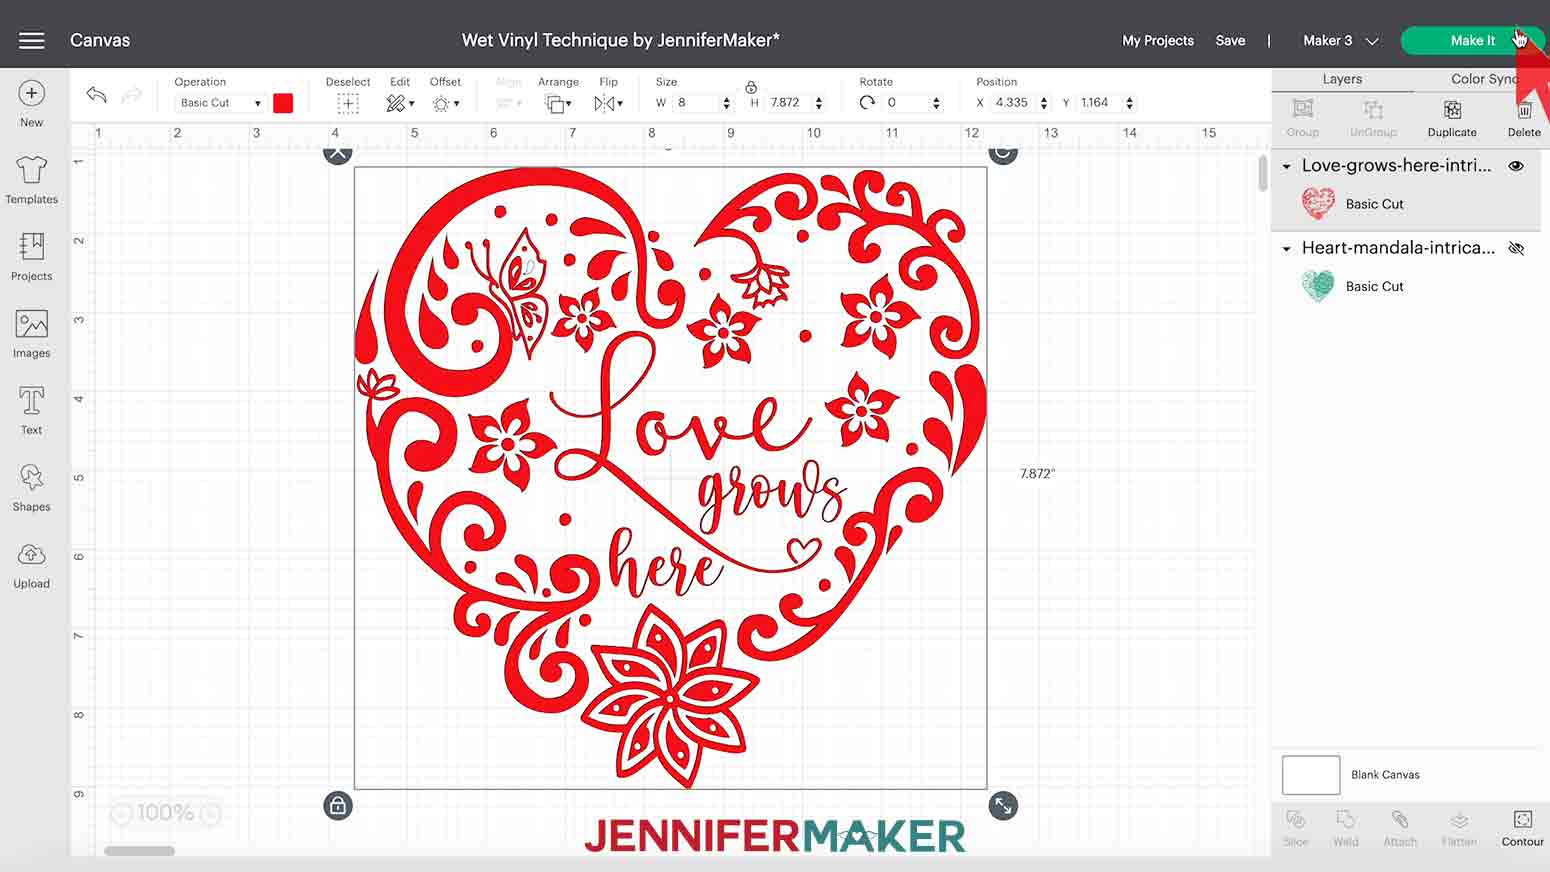 Selecting Make It for cutting intricate hearts decal